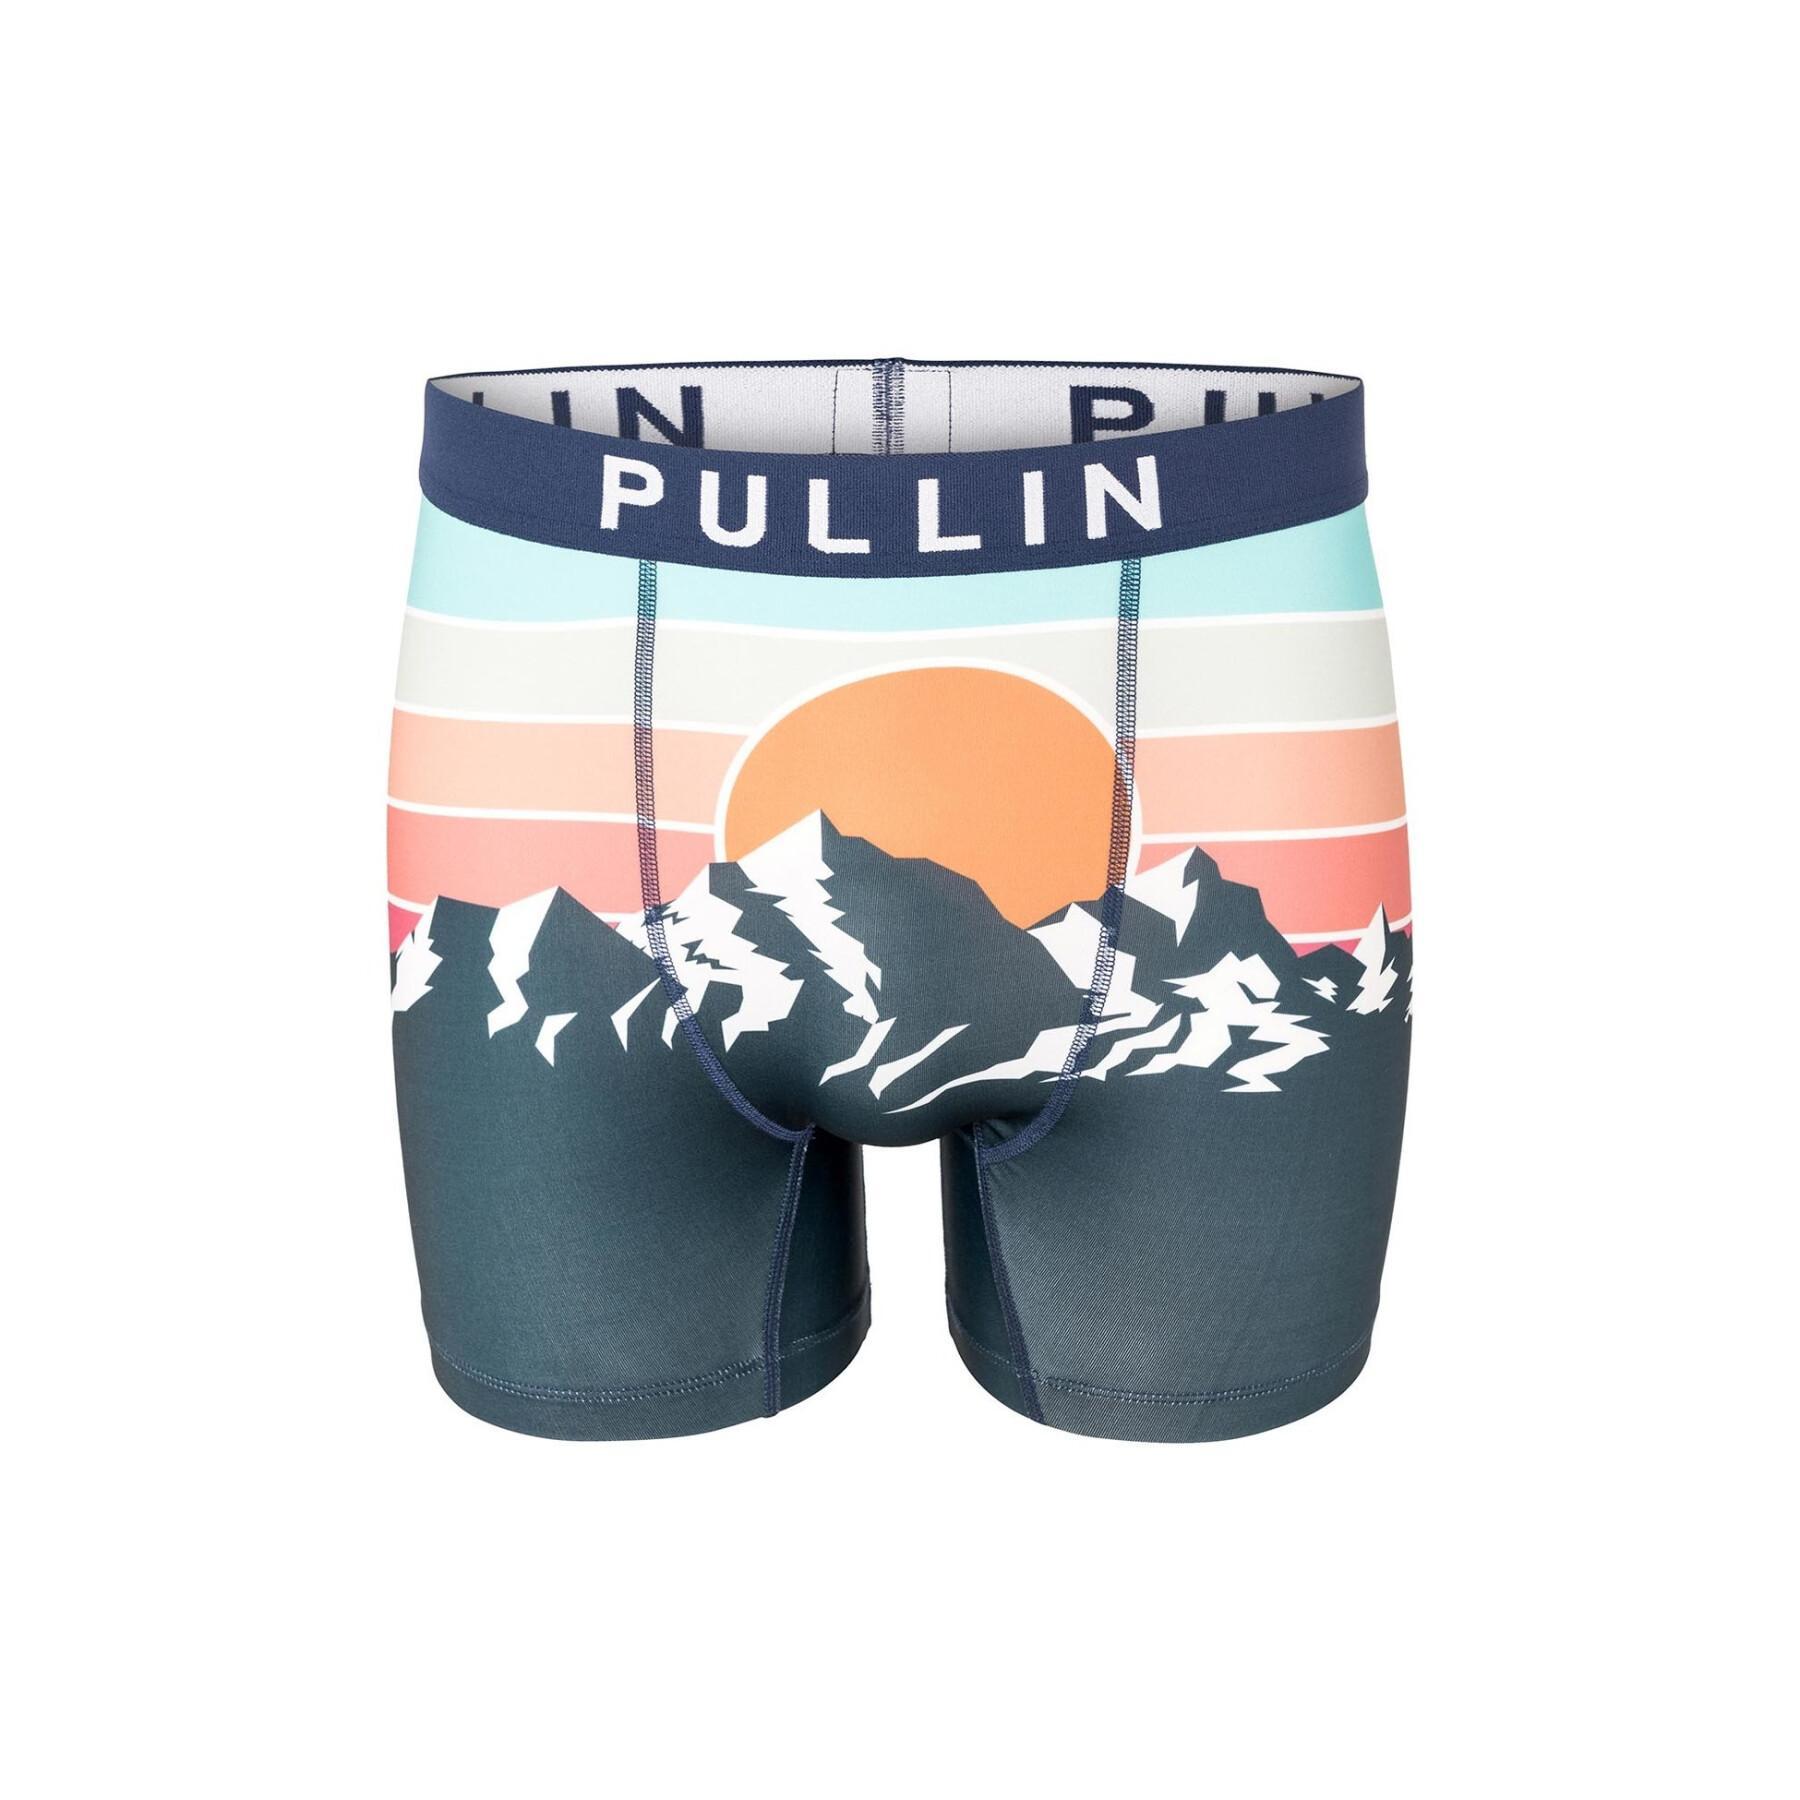 Boxer Pull-in fashion 2 moutainrise